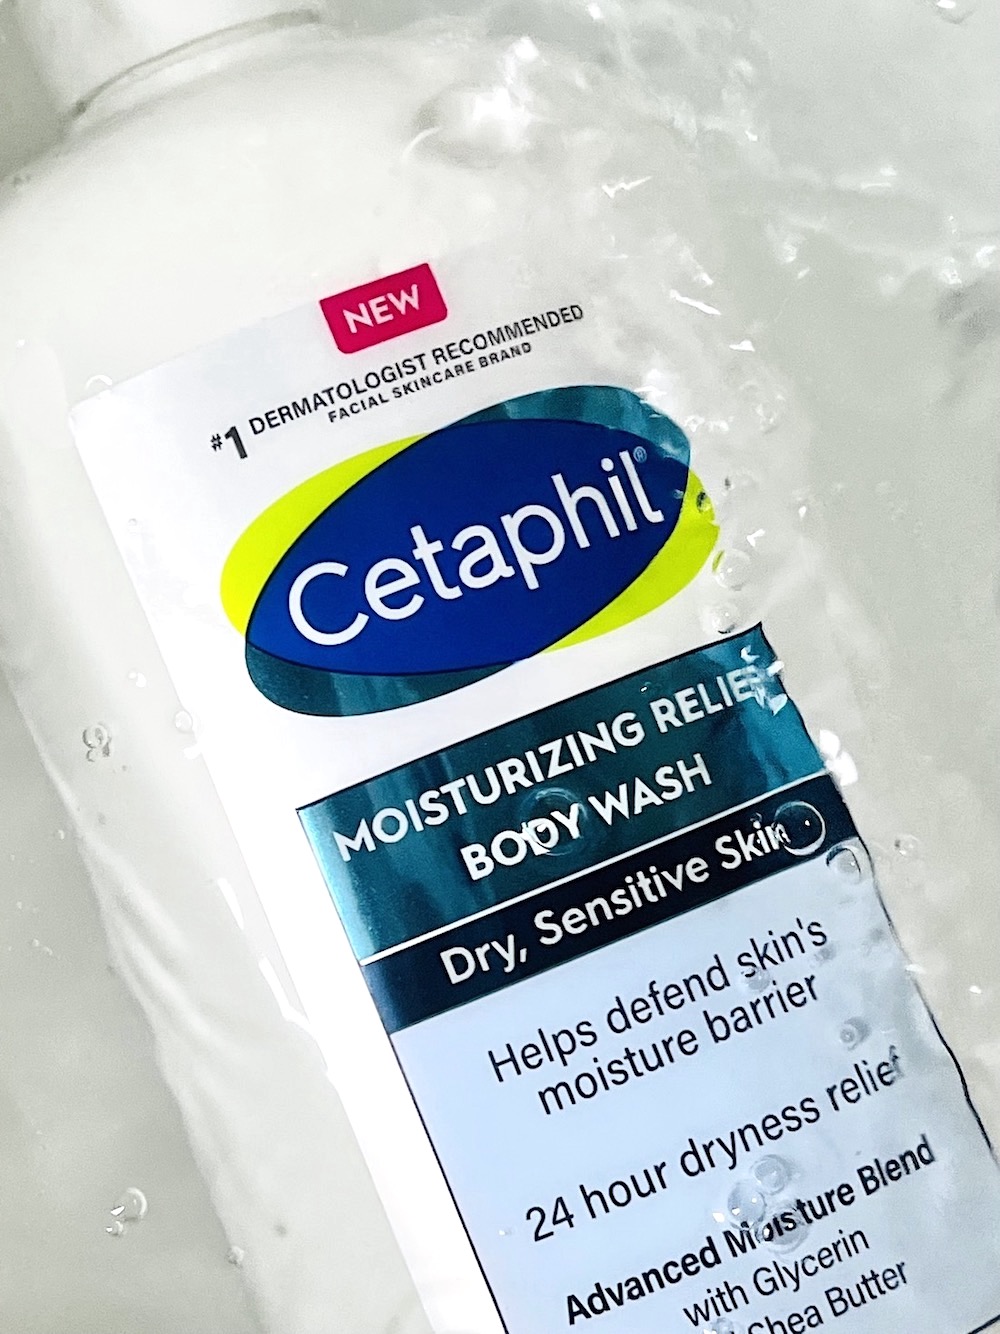 Cetaphil Moisturizing Relief Body Wash review